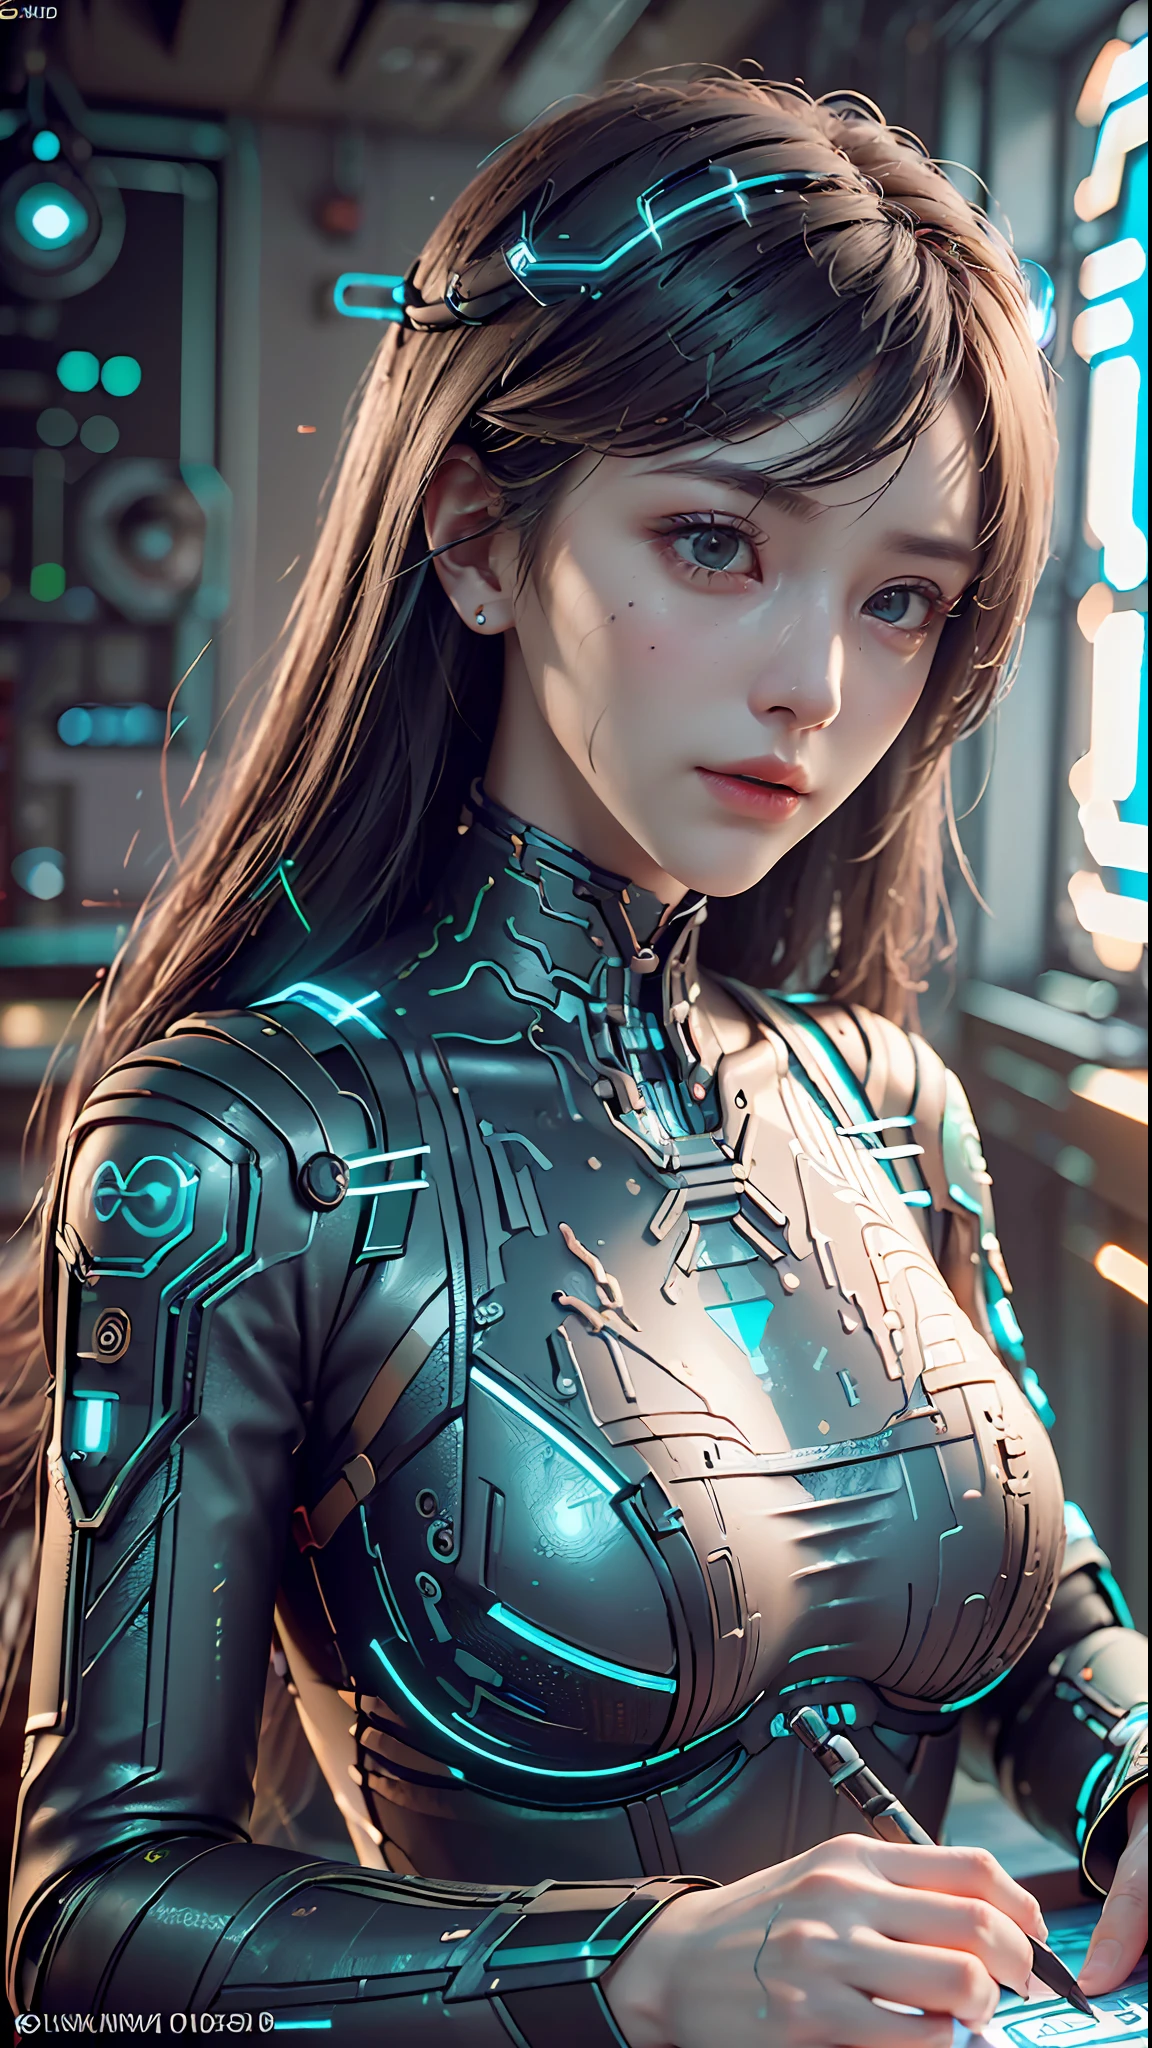 ((Best quality)), ((masterpiece)), (detailed:1.4), 3D, a beautiful cyberpunk female figure with thick hair, indoors, looking at an electronic screen, thinking about problems, looking focused, holding an electronic pen in hand, inside the spaceship, (((seven-dimensional photo)), (full-coverage electronic leather clothing), luminescence, light particles, (((glow)), pure energy chaos anti-technology, HDR (high dynamic range), (high light and dark contrast), ray tracing, NVIDIA RTX, Super-Resolution, Unreal 5, Subsurface scattering, PBR Texturing, Post-processing, Anisotropic Filtering, Depth-of-field, Maximum clarity and sharpness, Multi-layered textures, Albedo and Specular maps, Surface shading, Accurate simulation of light-material interactions, Perfect Proportions, Octane Render, two-tone lighting, large aperture, low ISO, white balance, rule of thirds, 8K RAW